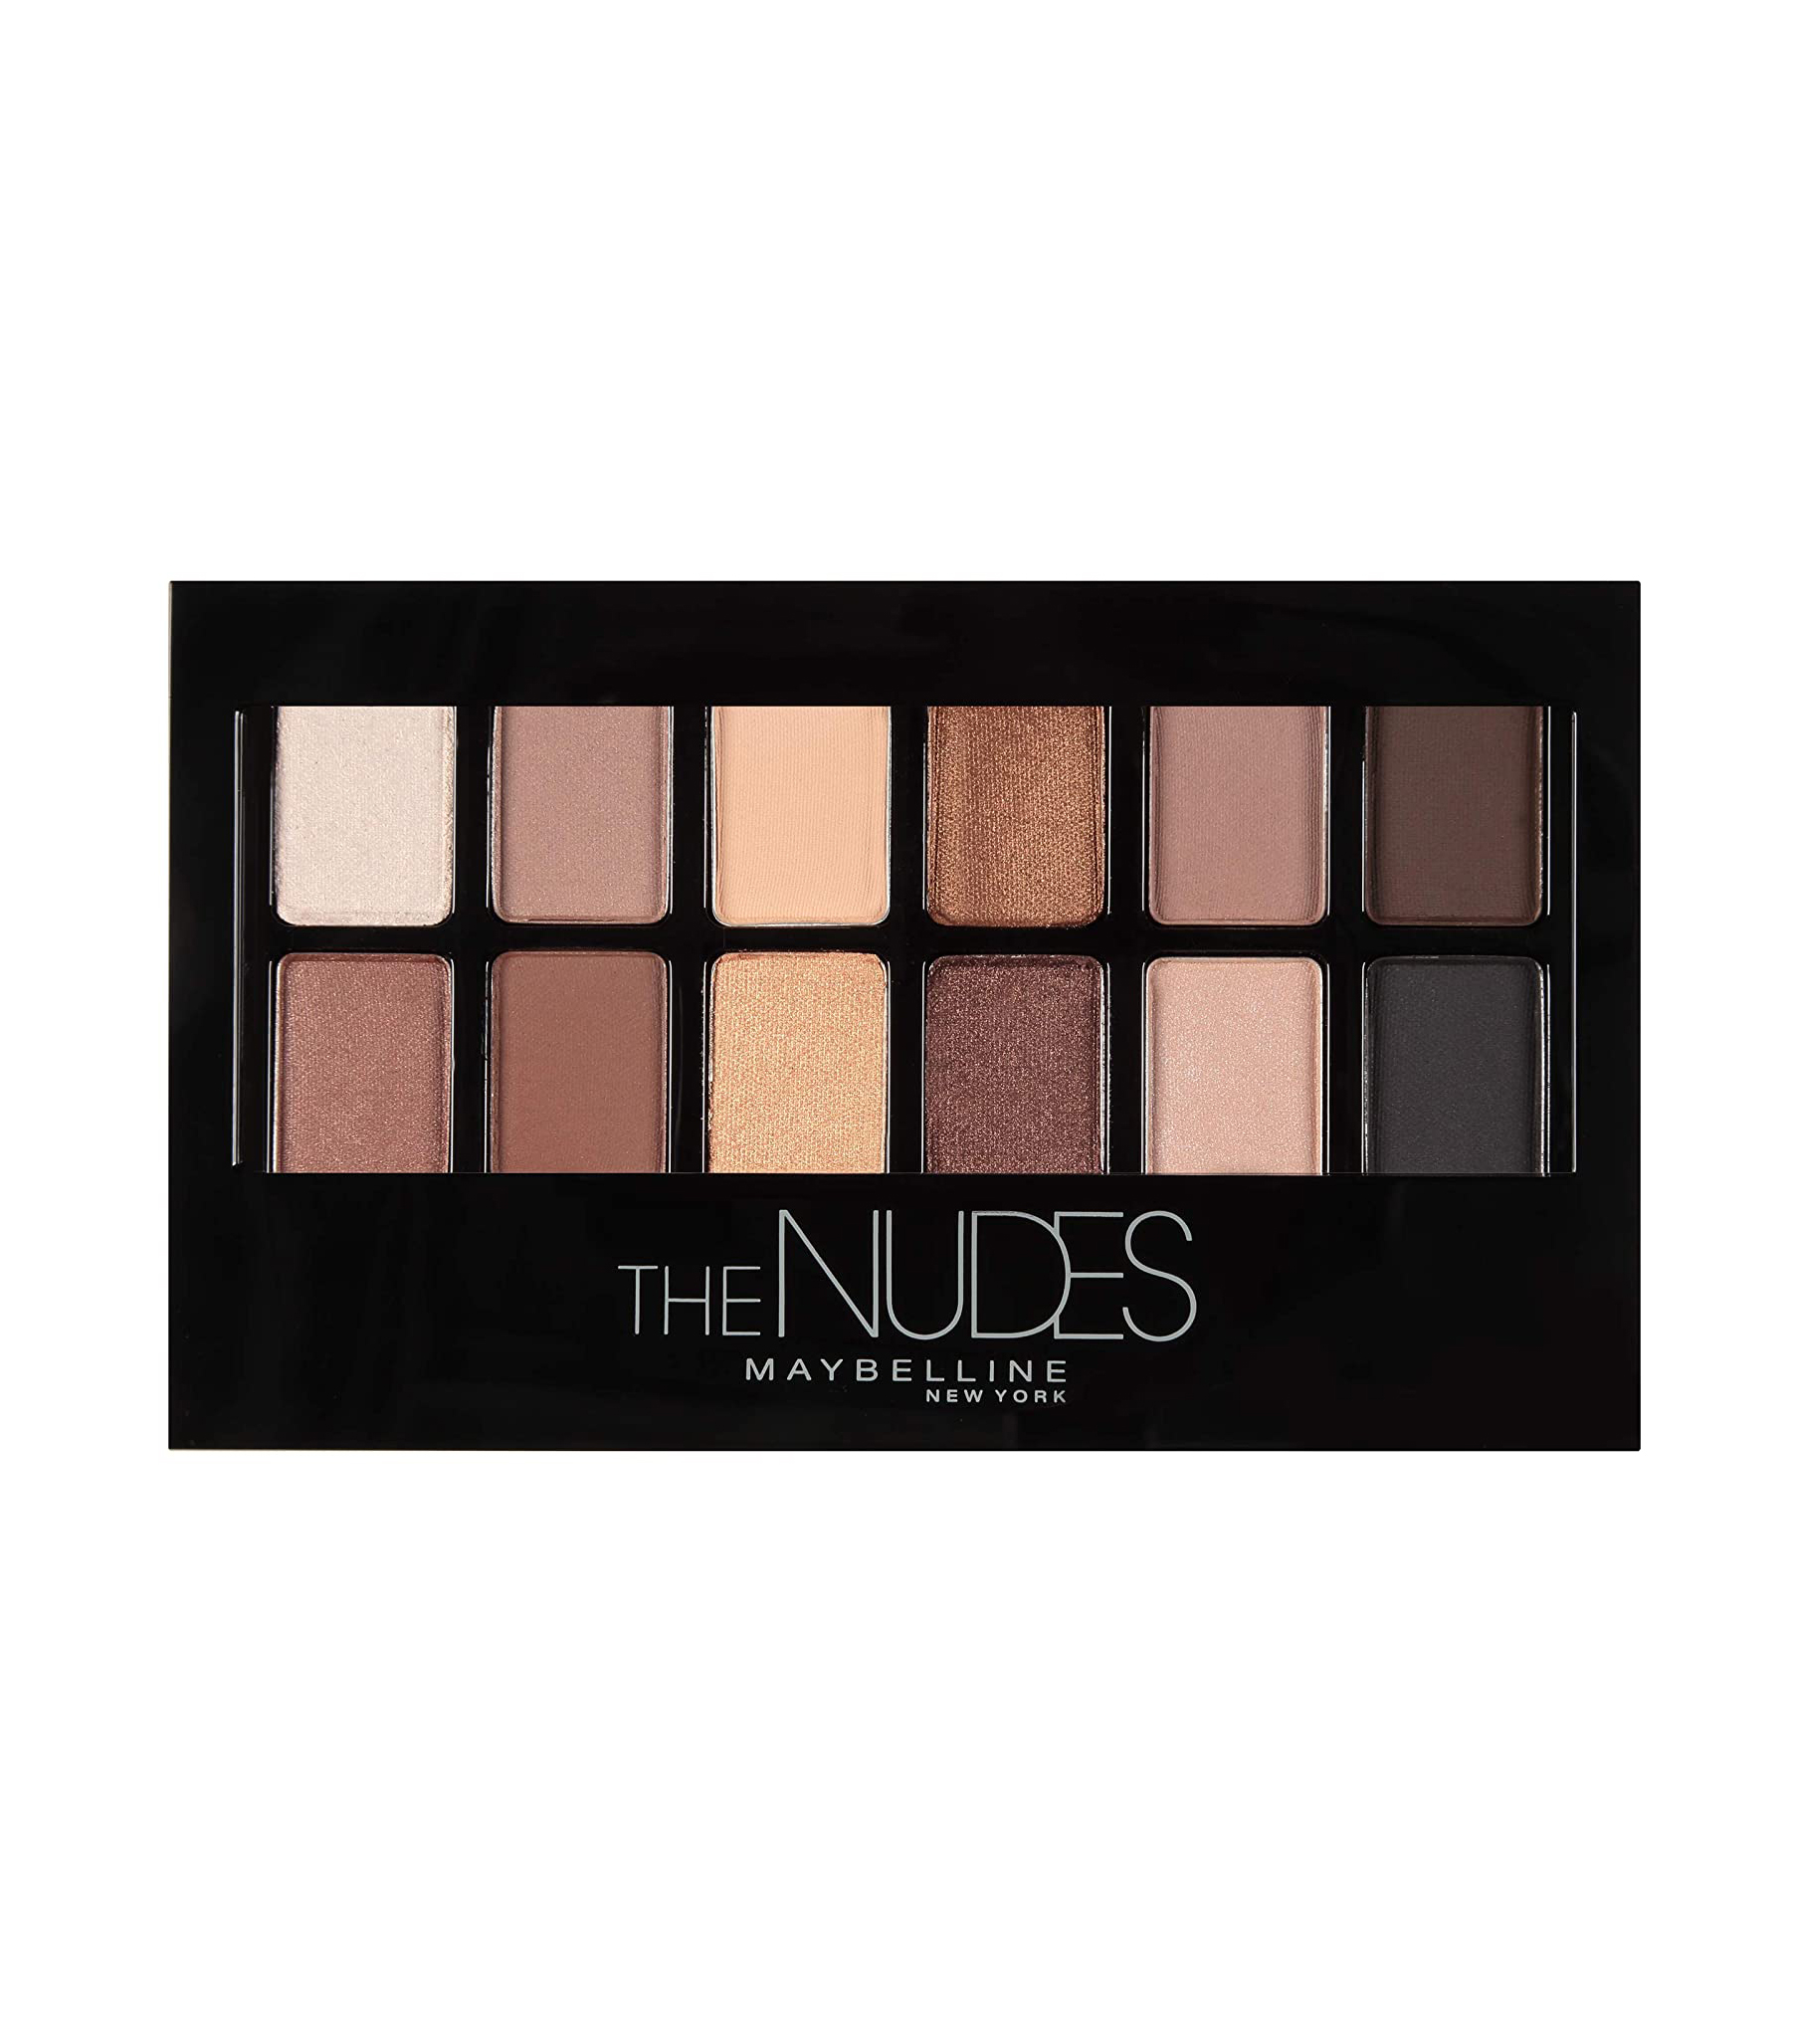 The 17 Best Neutral Eye Shadow Palettes for Any Occasion | Who What Wear